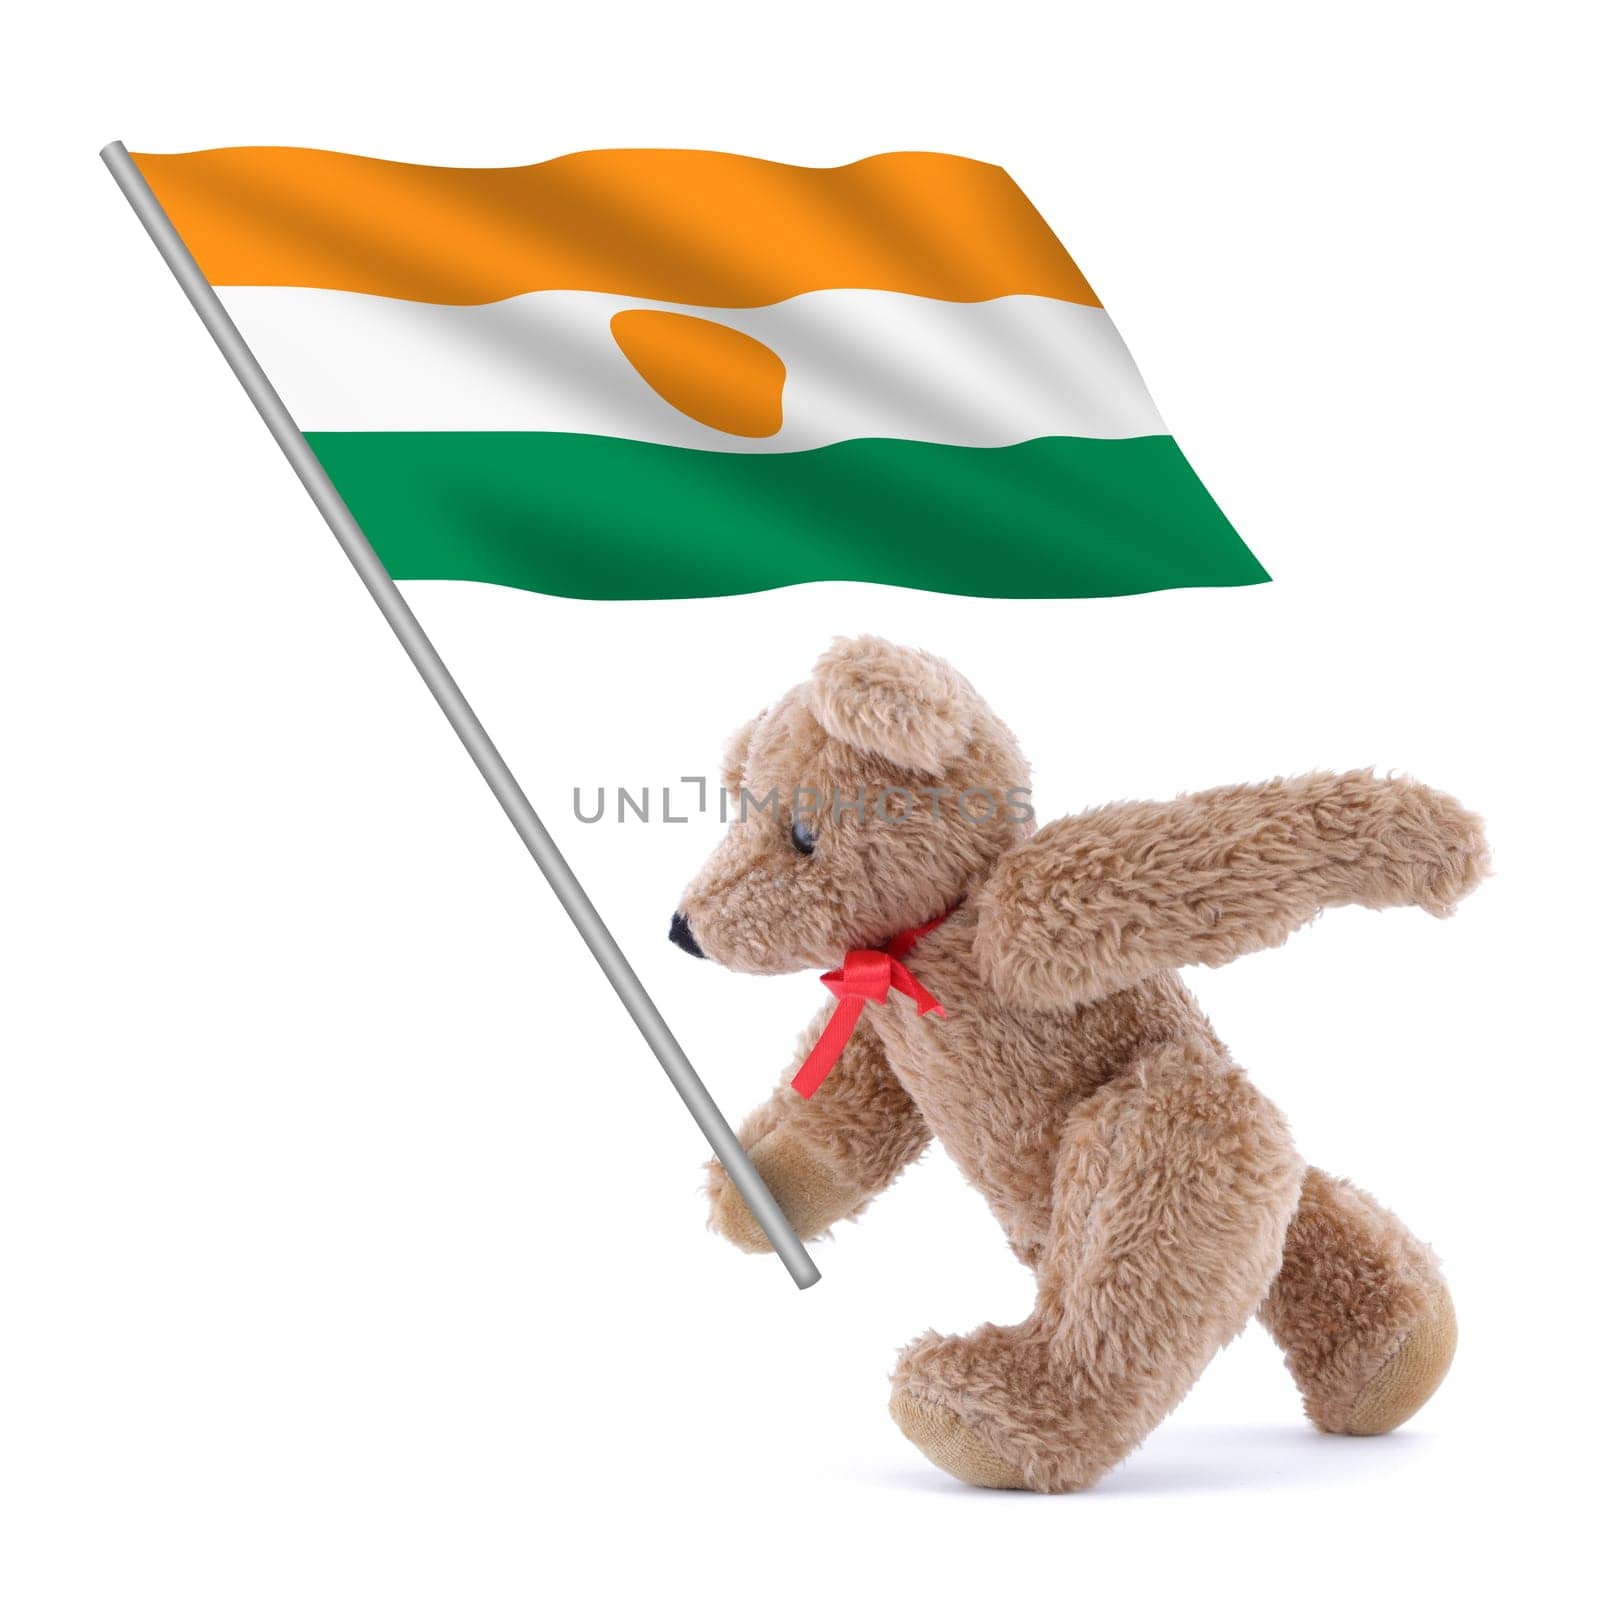 Niger flag being carried by a cute teddy bear by VivacityImages